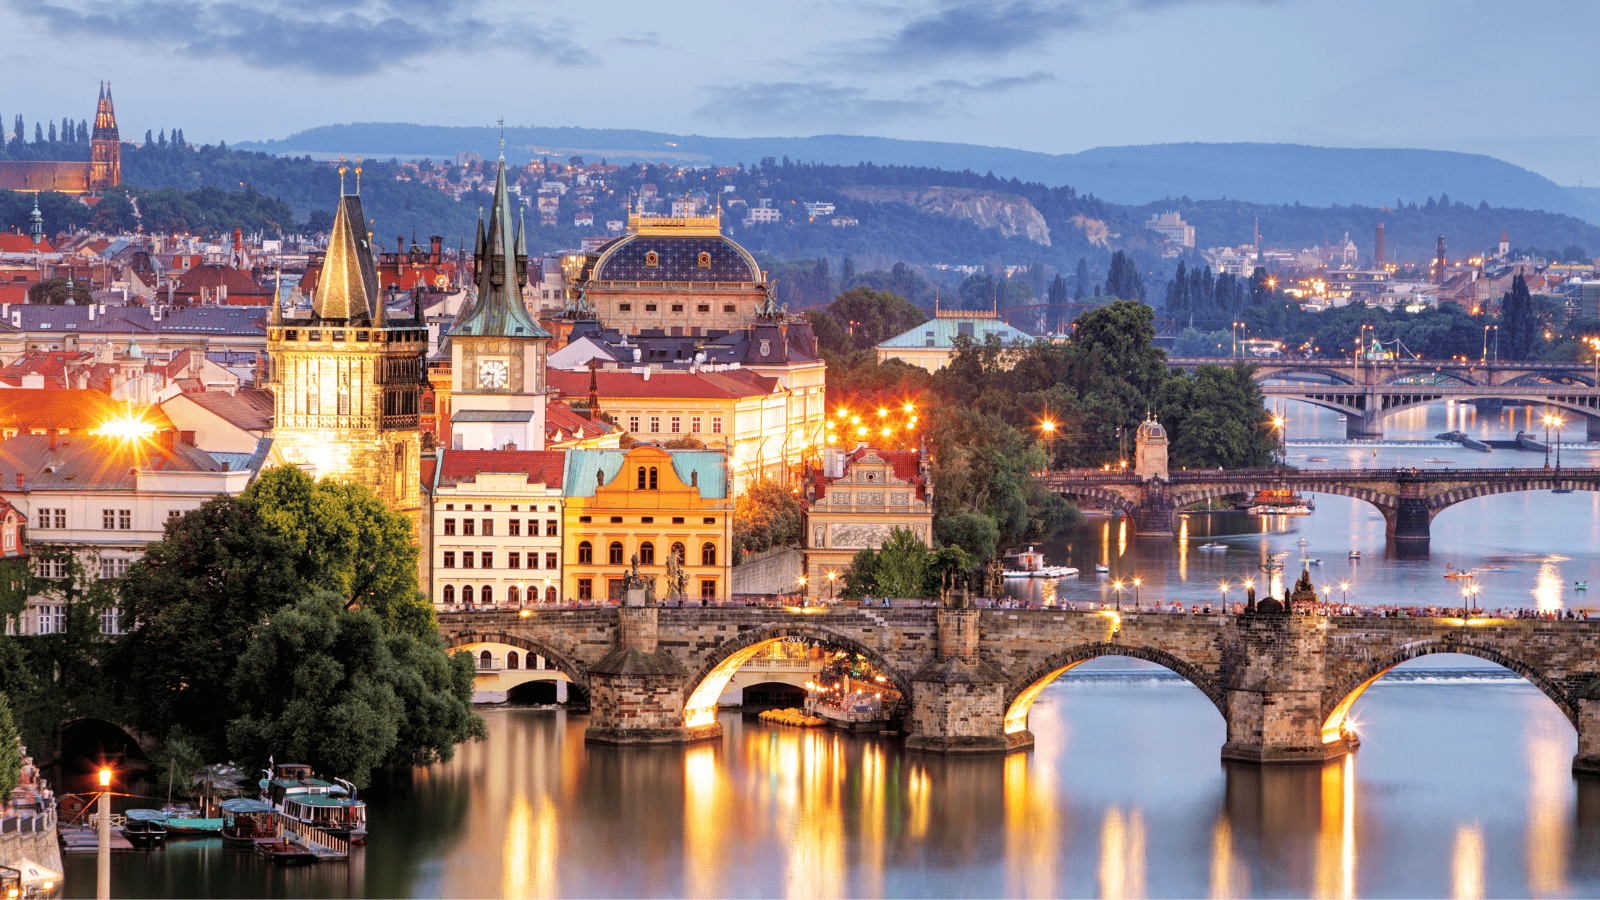 <p>Since Prague is compact, it’s easy to navigate with limited mobility. Many top sights are near each other, and the city has made great strides in installing accessible features.</p><p>A <a href="https://whatthefab.com/luxury-river-cruises.html" rel="follow">river cruise</a> is an excellent Prague activity for those with disabilities. You can admire historic landmarks and architecture without worrying about stairs or uneven surfaces.</p>